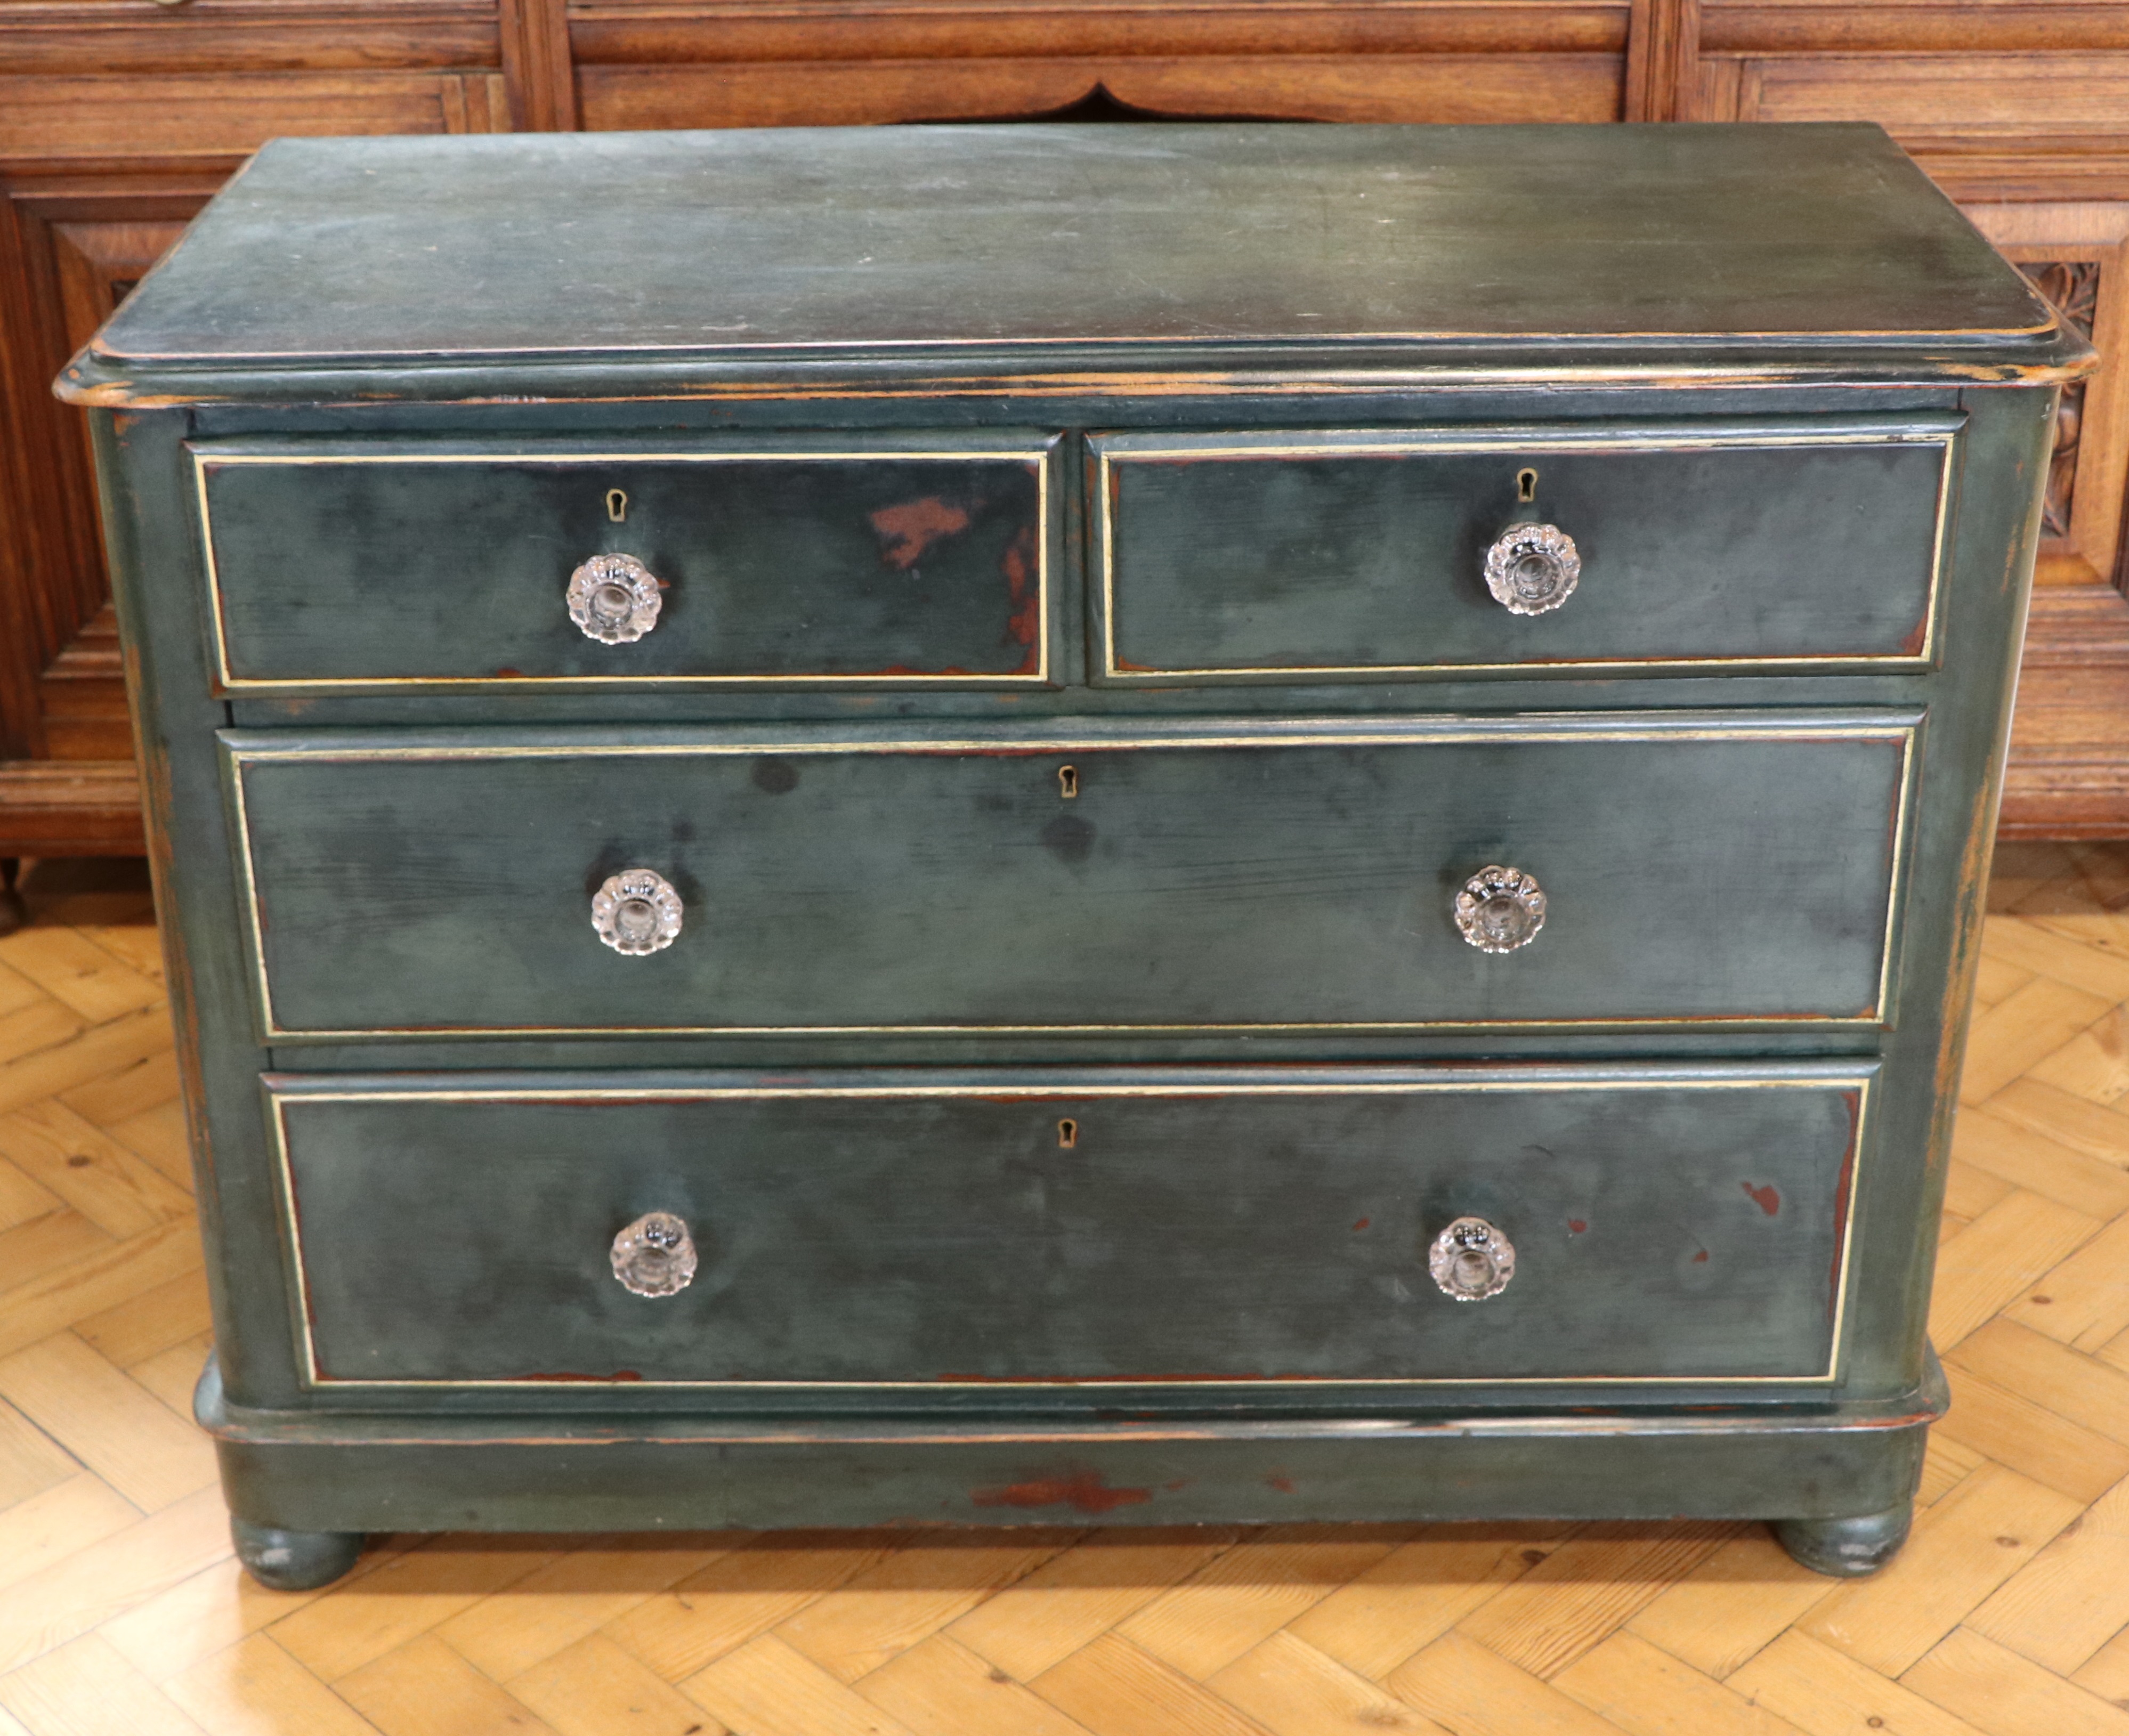 A Victorian painted-pine chest of drawers, having pressed glass lobed knob handles, 52 cm x 104 cm x